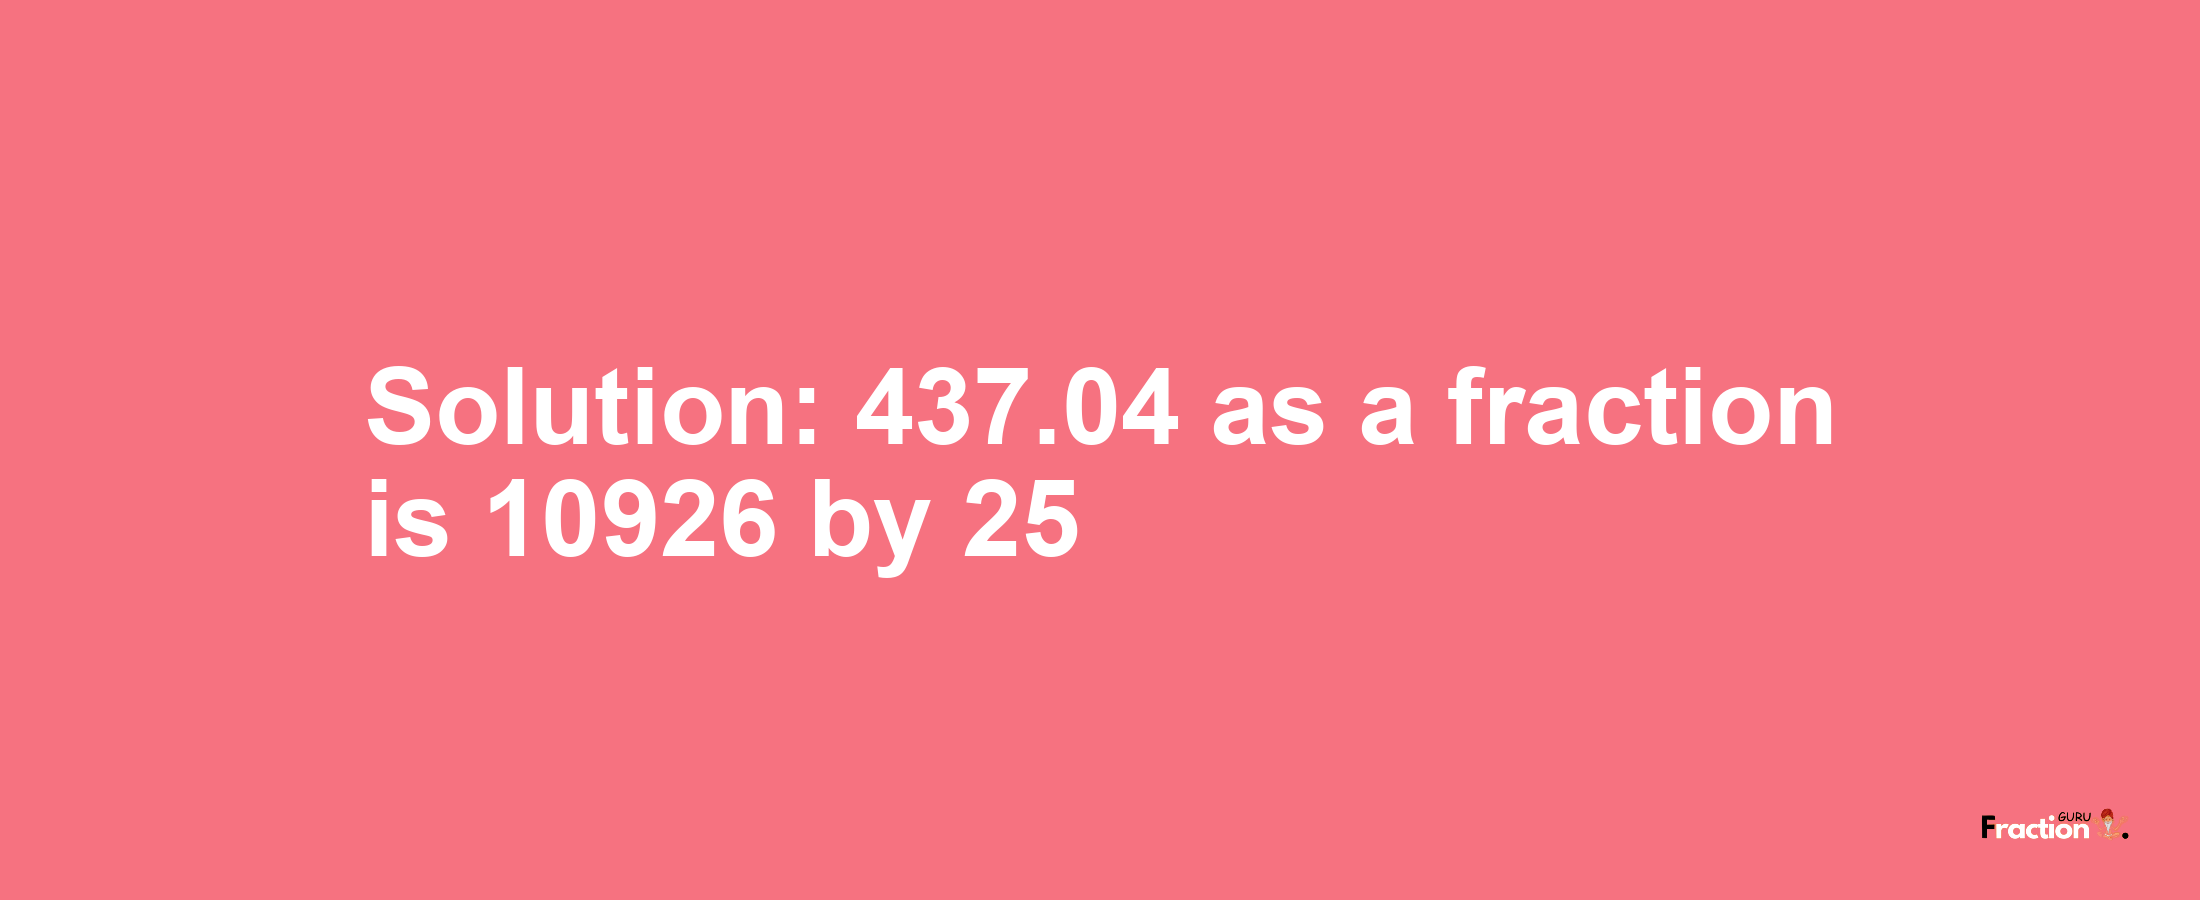 Solution:437.04 as a fraction is 10926/25